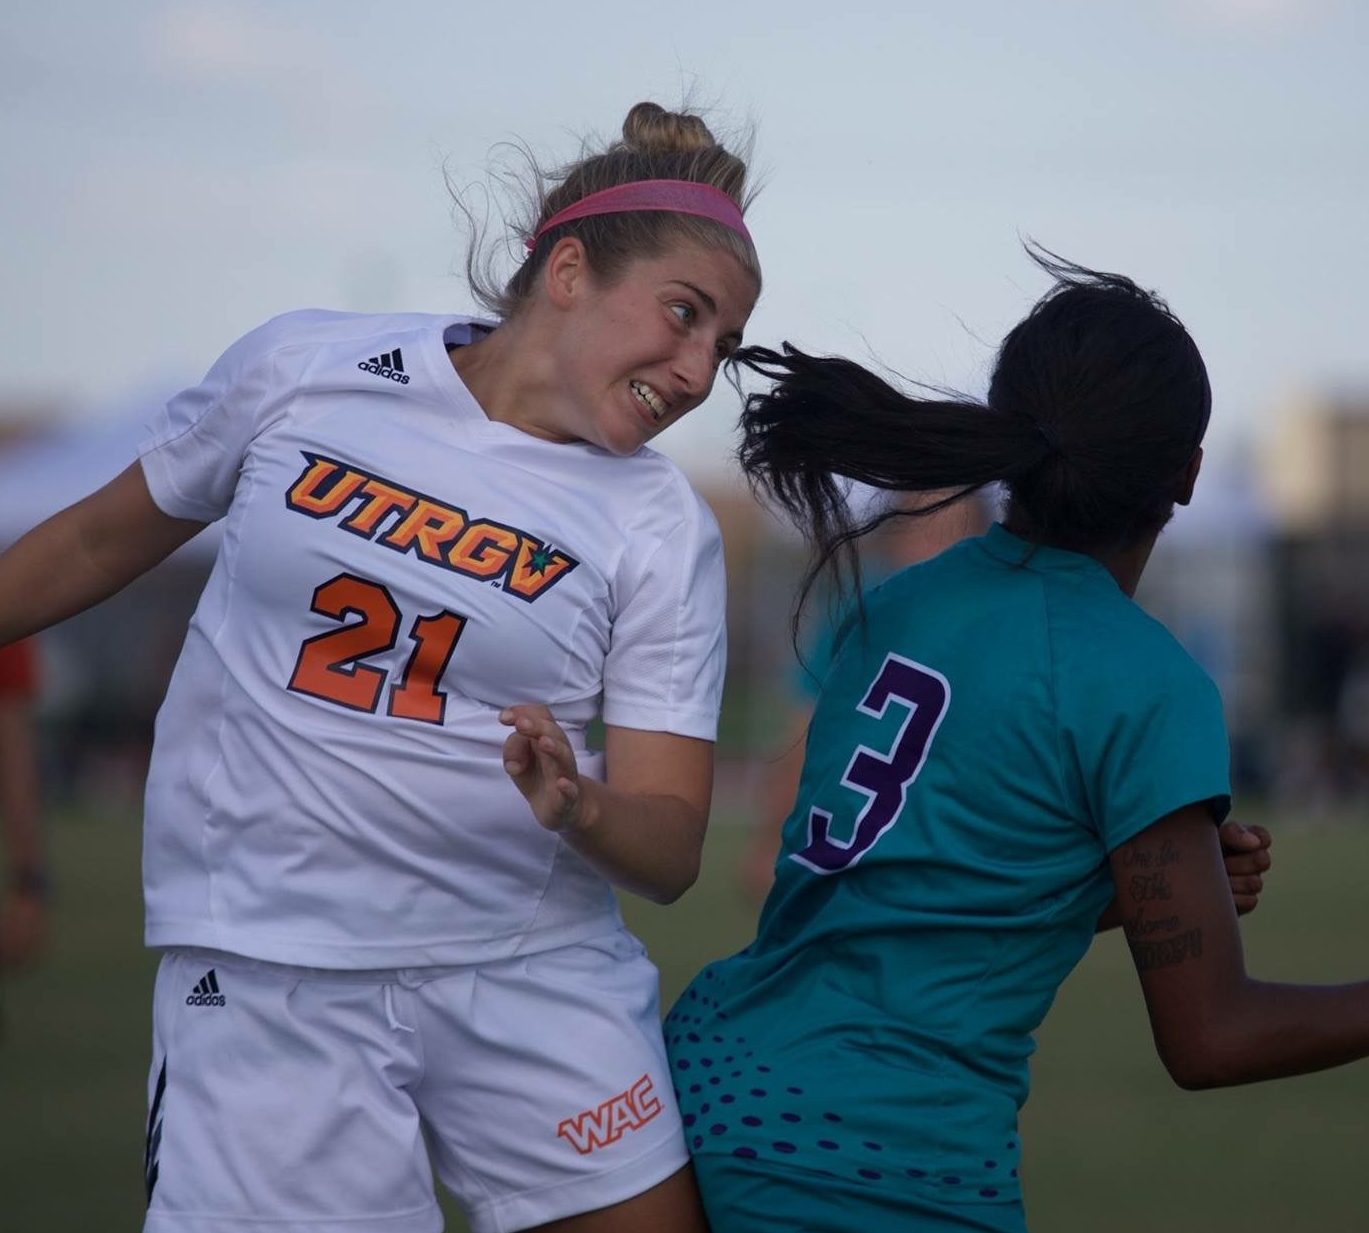 A soccer player from the University of Texas Rio Grande Valley jumping to head a ball